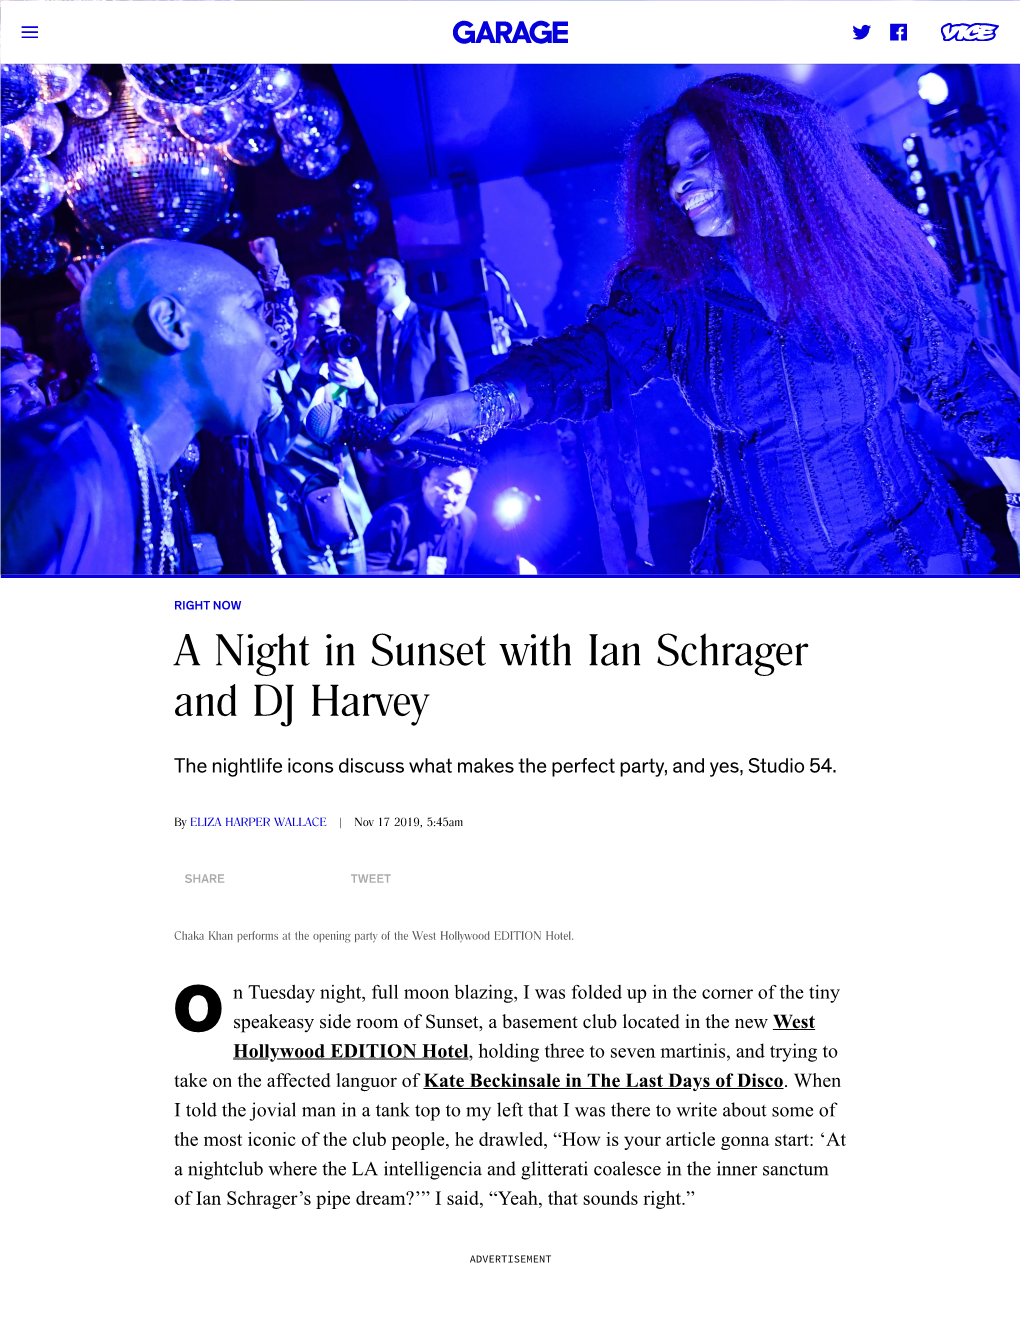 A Night in Sunset with Ian Schrager and DJ Harvey